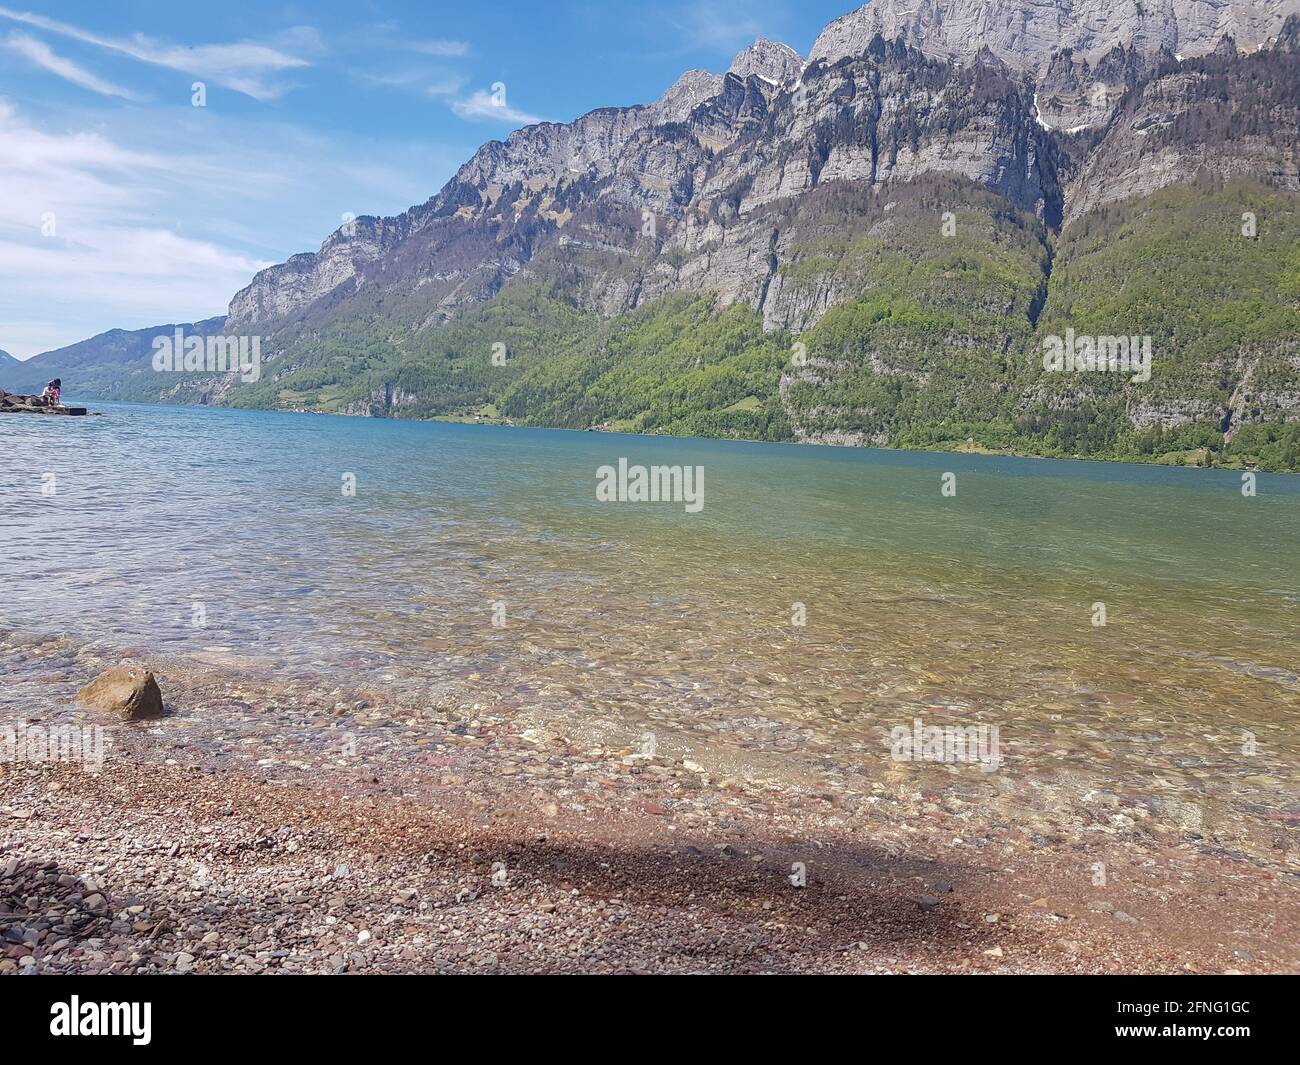 Beautiful landscape with a clean lake on the mountain in Walensee, Quarten,  Switzerland Stock Photo - Alamy